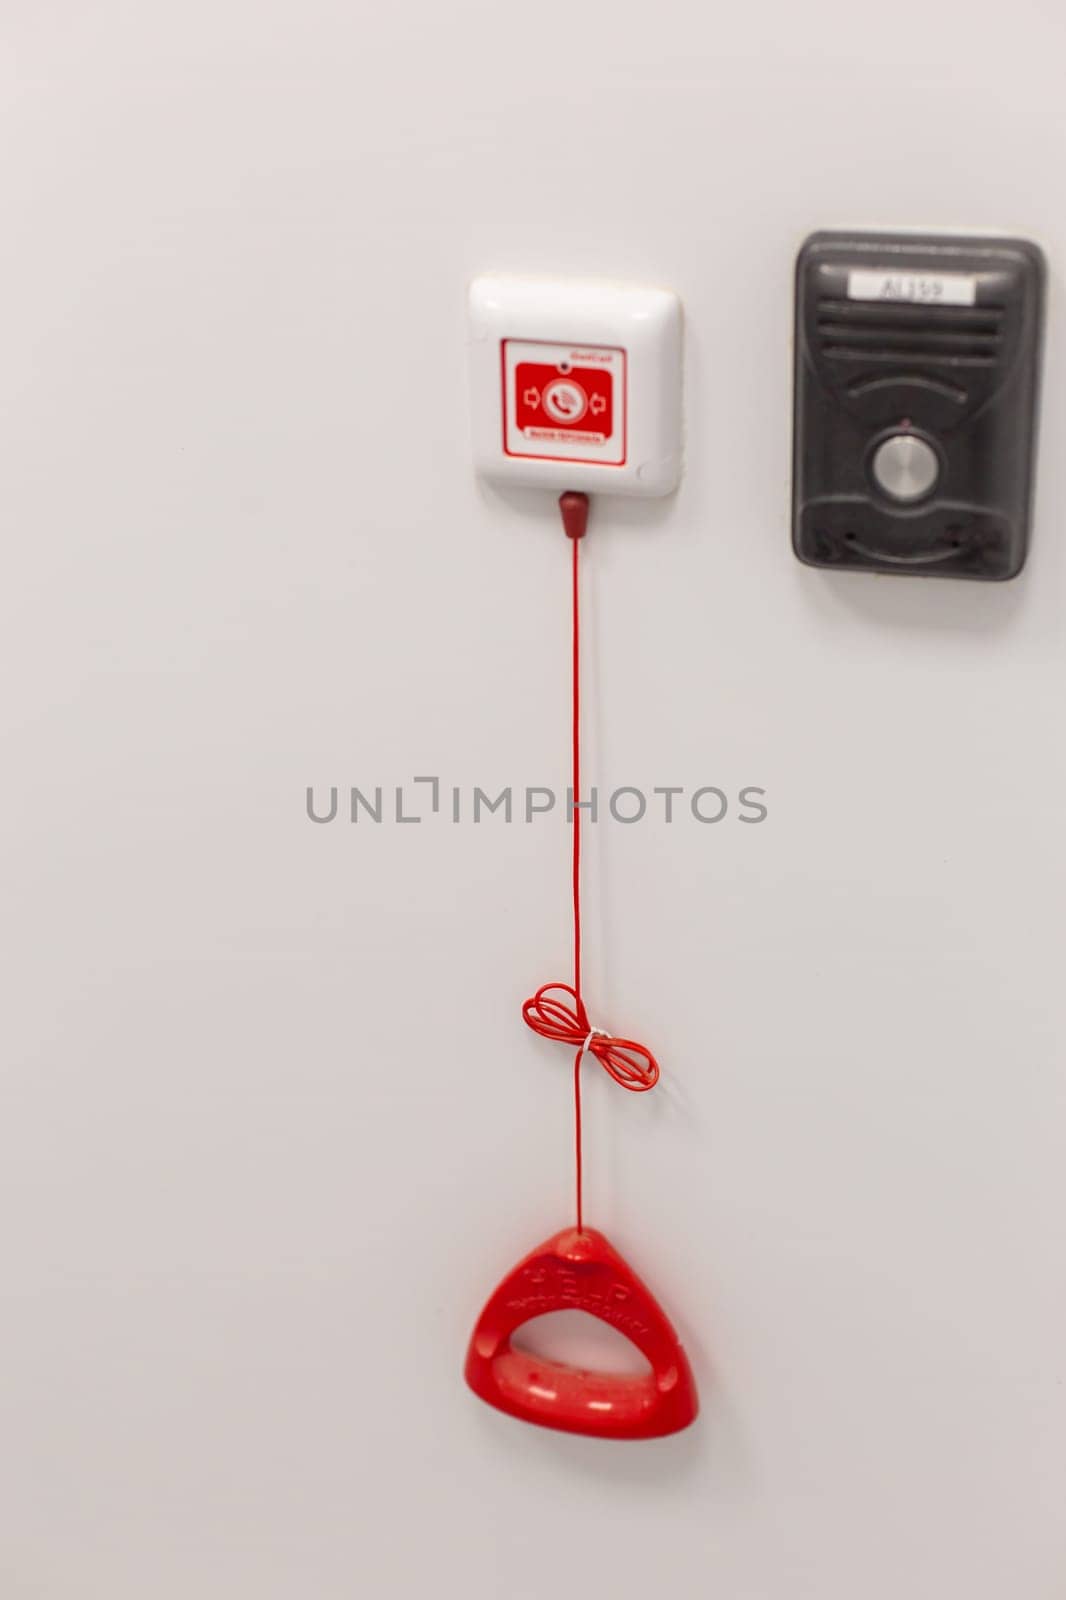 A red emergency pull cord system on a white wall in a clinical setting.